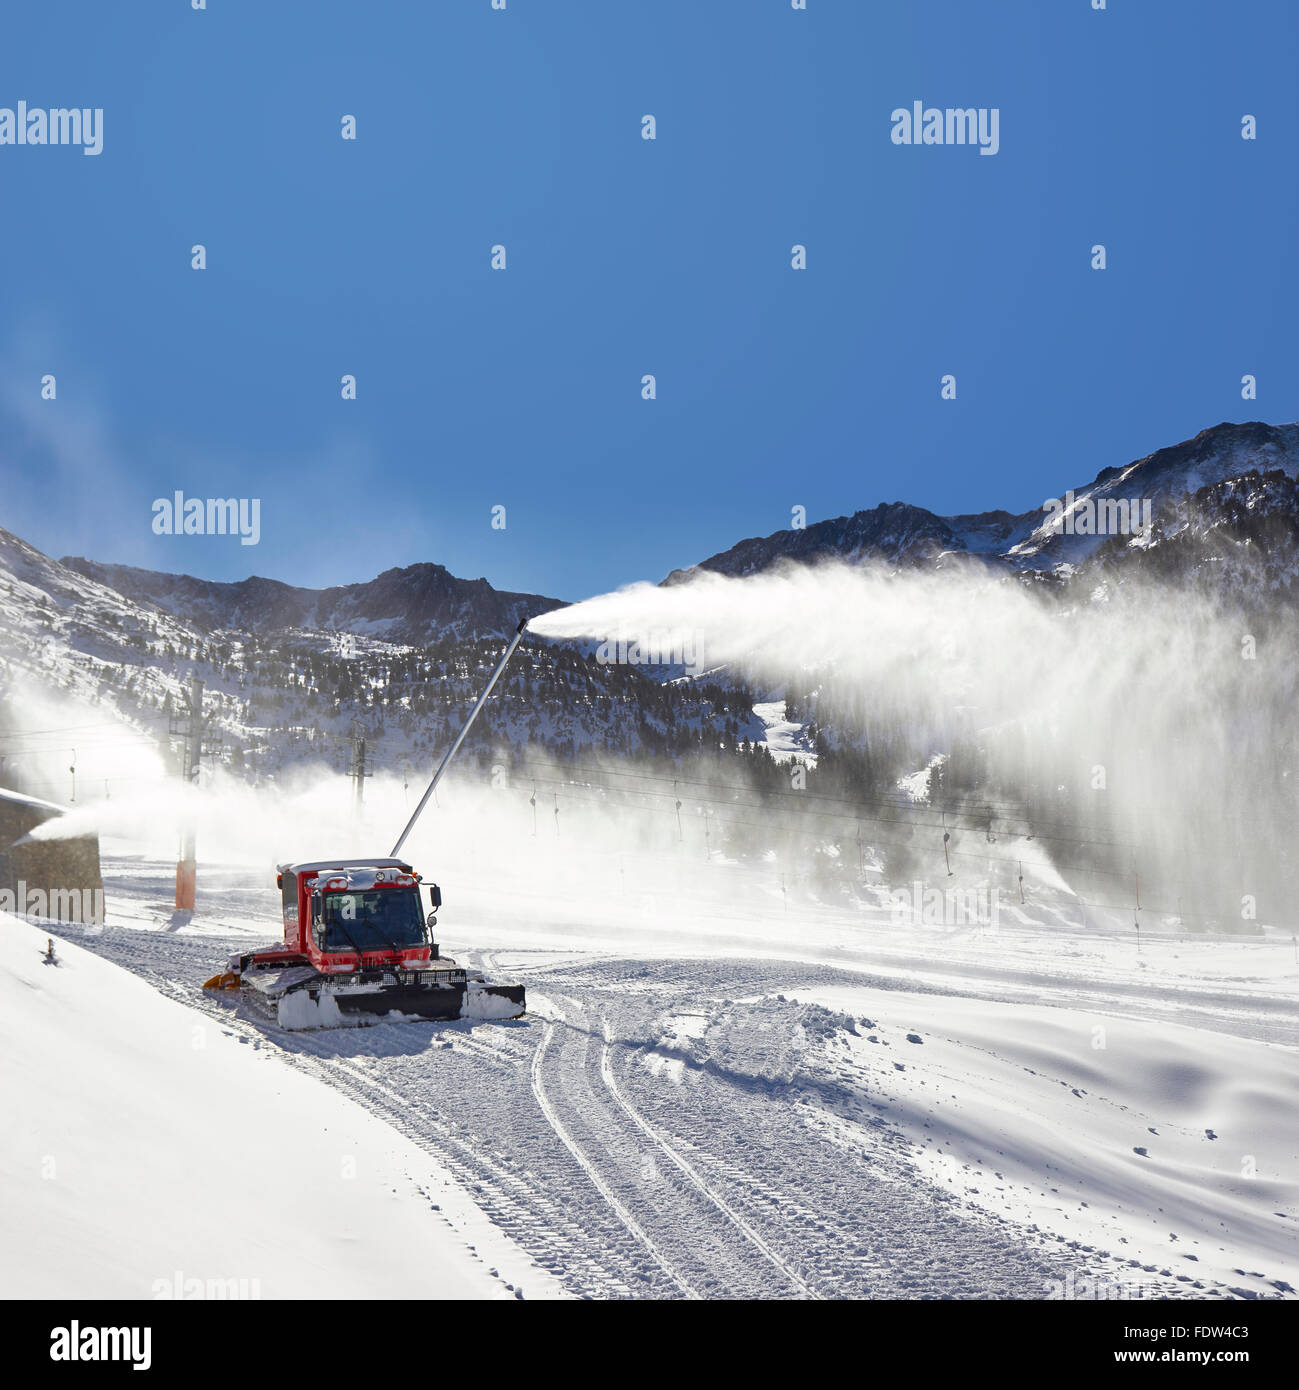 Preparation of ski resort in Pyrenees by red ratrack vehicle and snow canon, Andorra, Europe Stock Photo